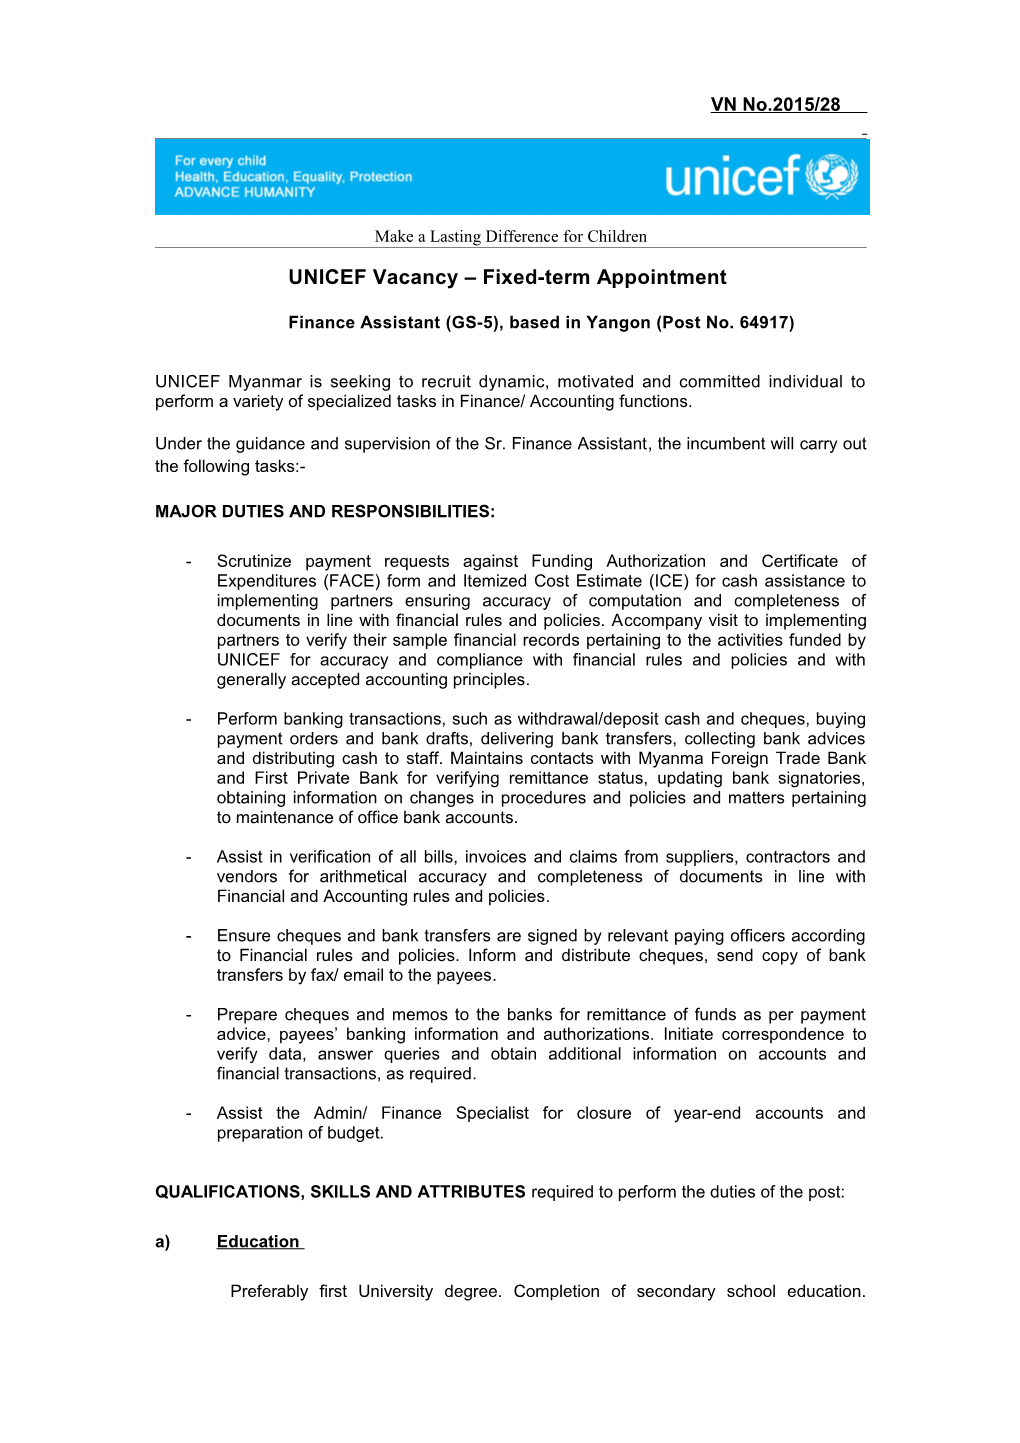 Finance Assistant (GS-5), Based in Yangon (Post No. 64917)